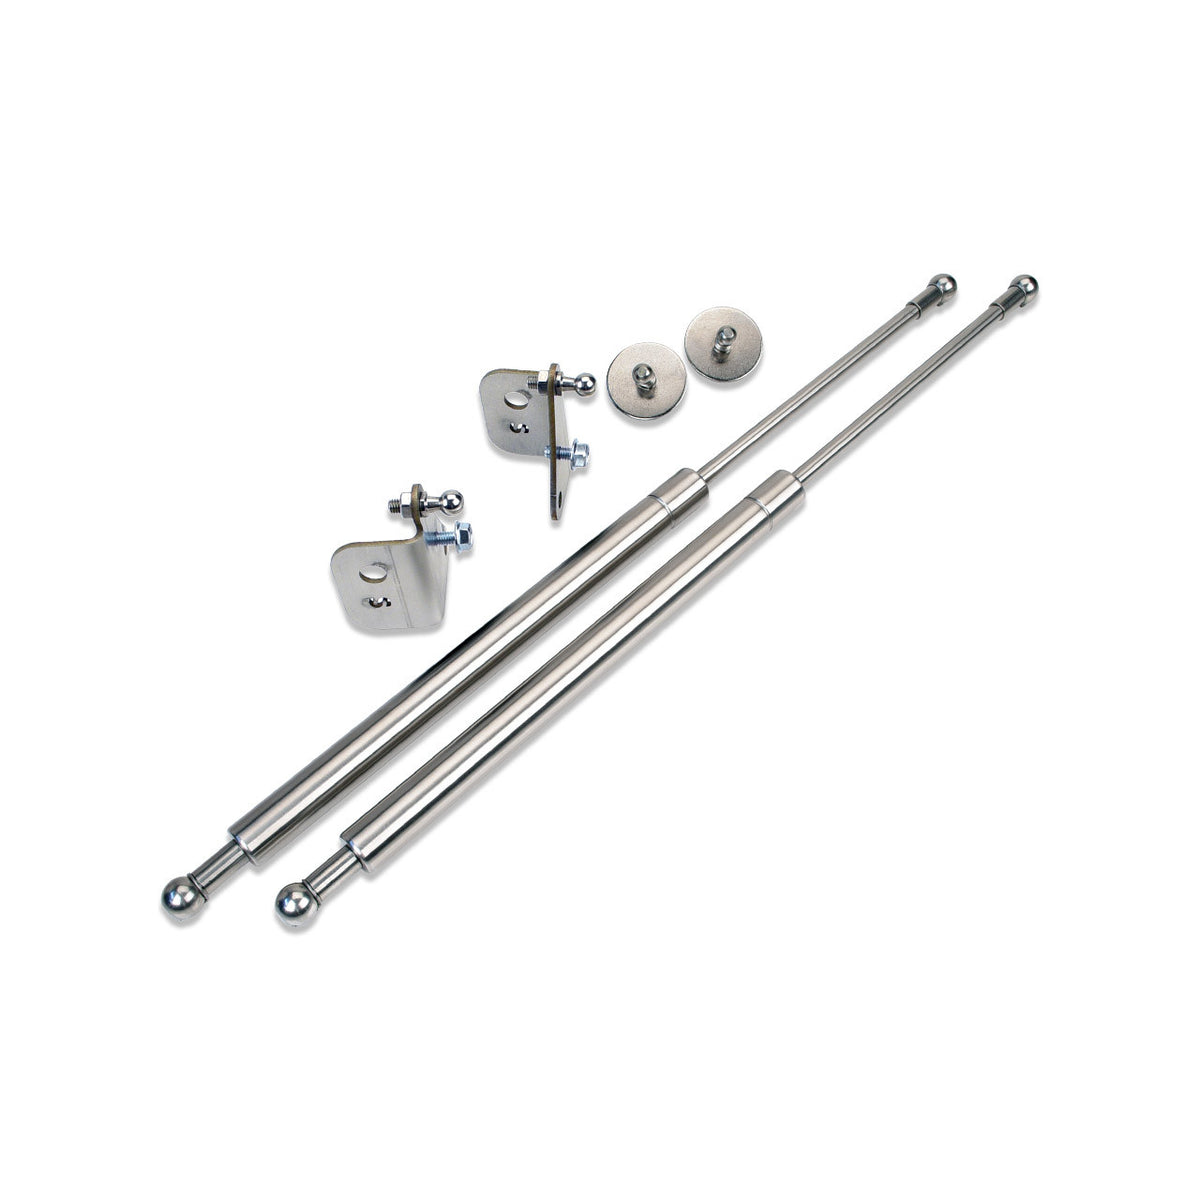 IAG EZ-Lift Hood Struts for 2021+ Ford Bronco - Stainless Steel / Silver Finish